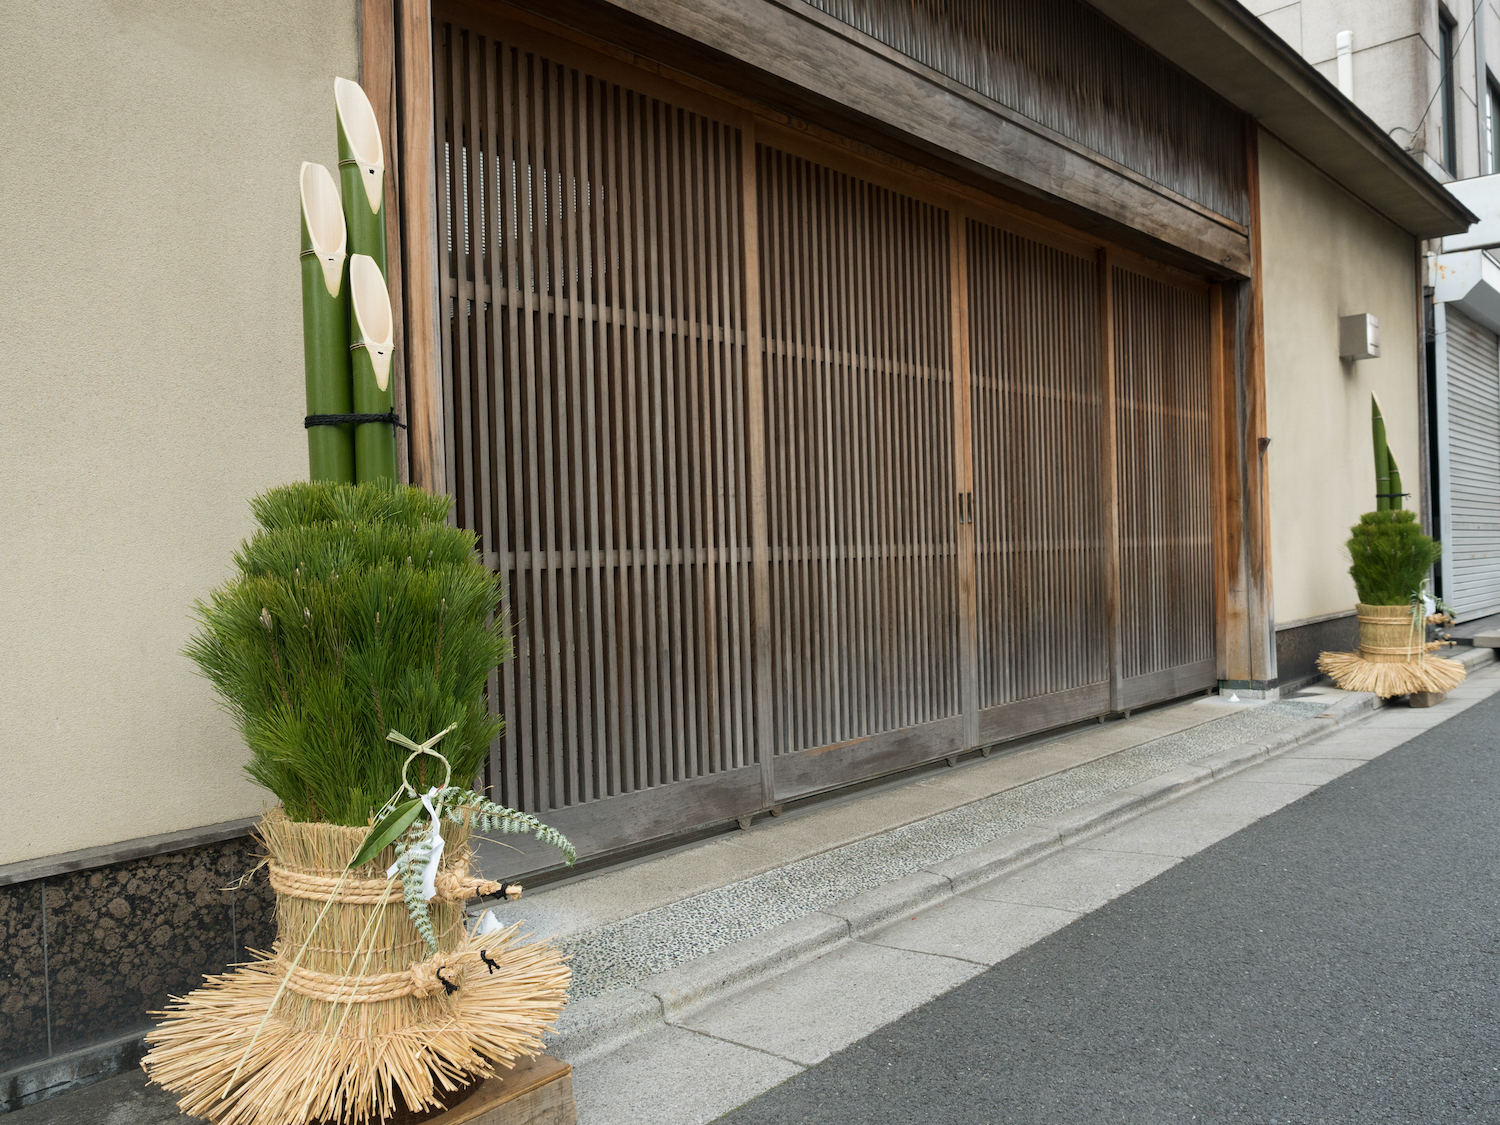 New Year decorations of Japan, Kadomatsu at each side of the front gate of the house